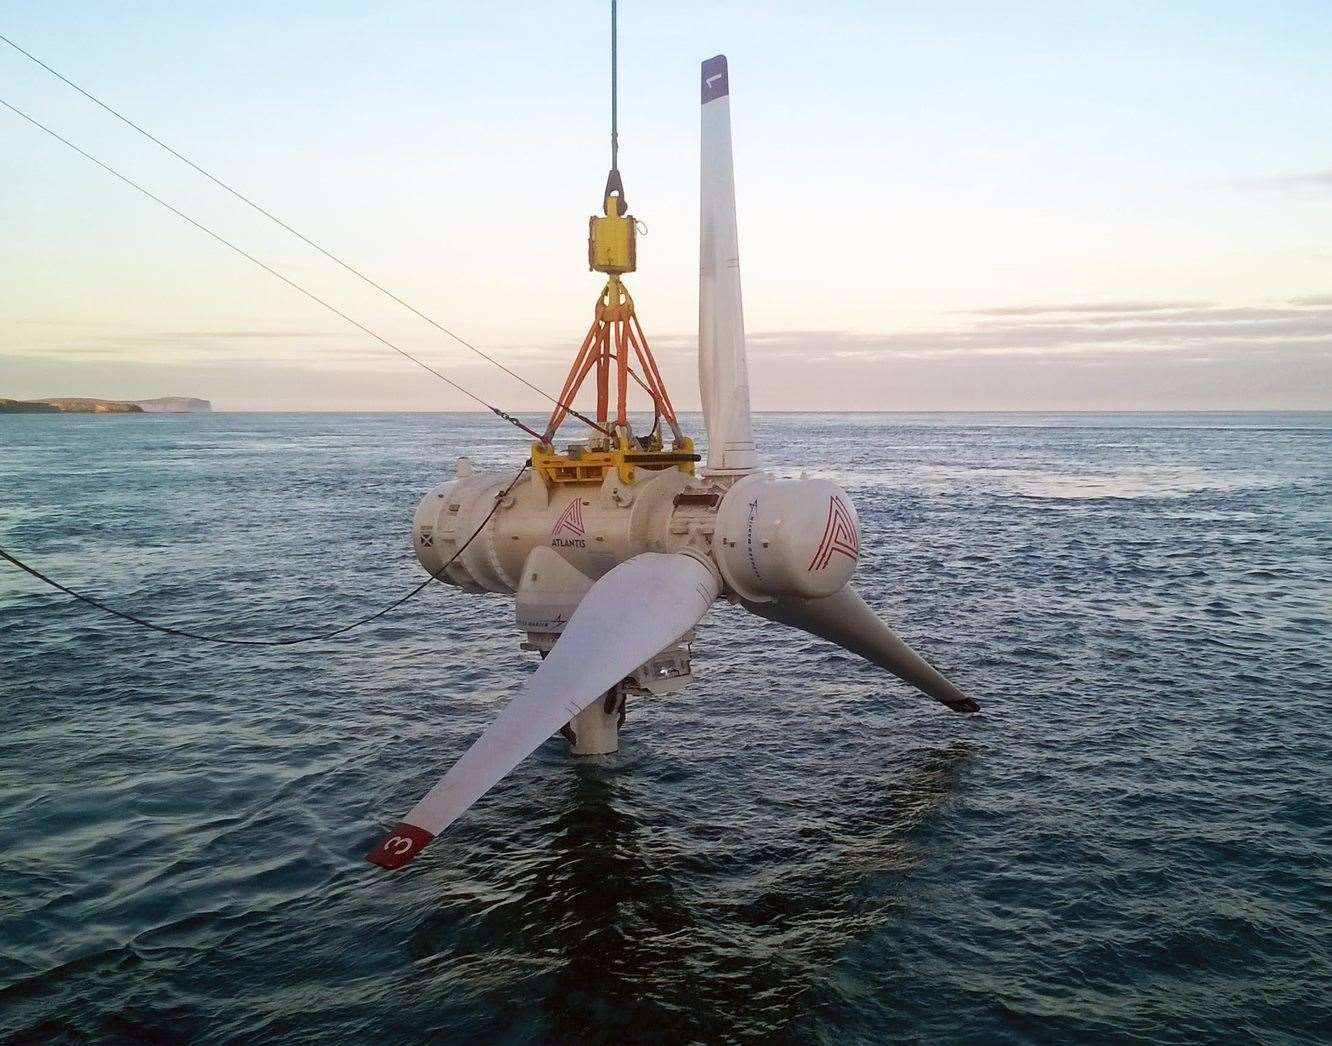 An in-depth survey of developers working in the tidal and wave energy sectors is to be carried out.